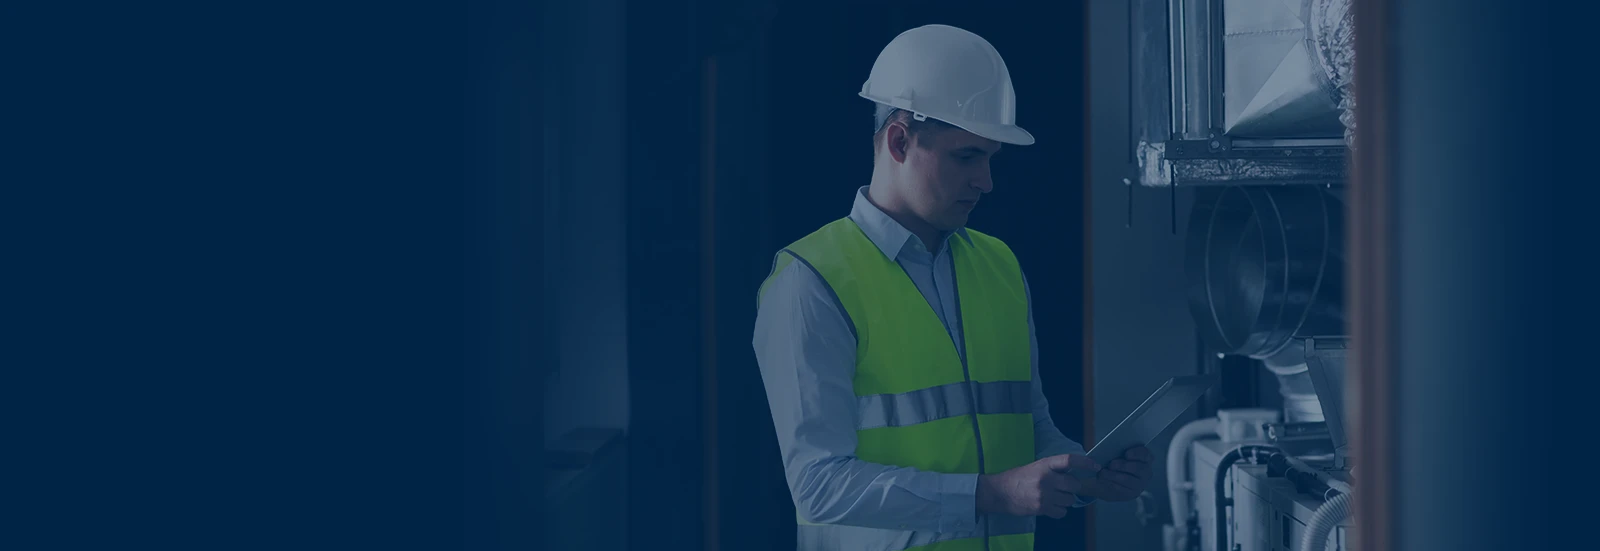 background image of HVAC specialist holding a tablet